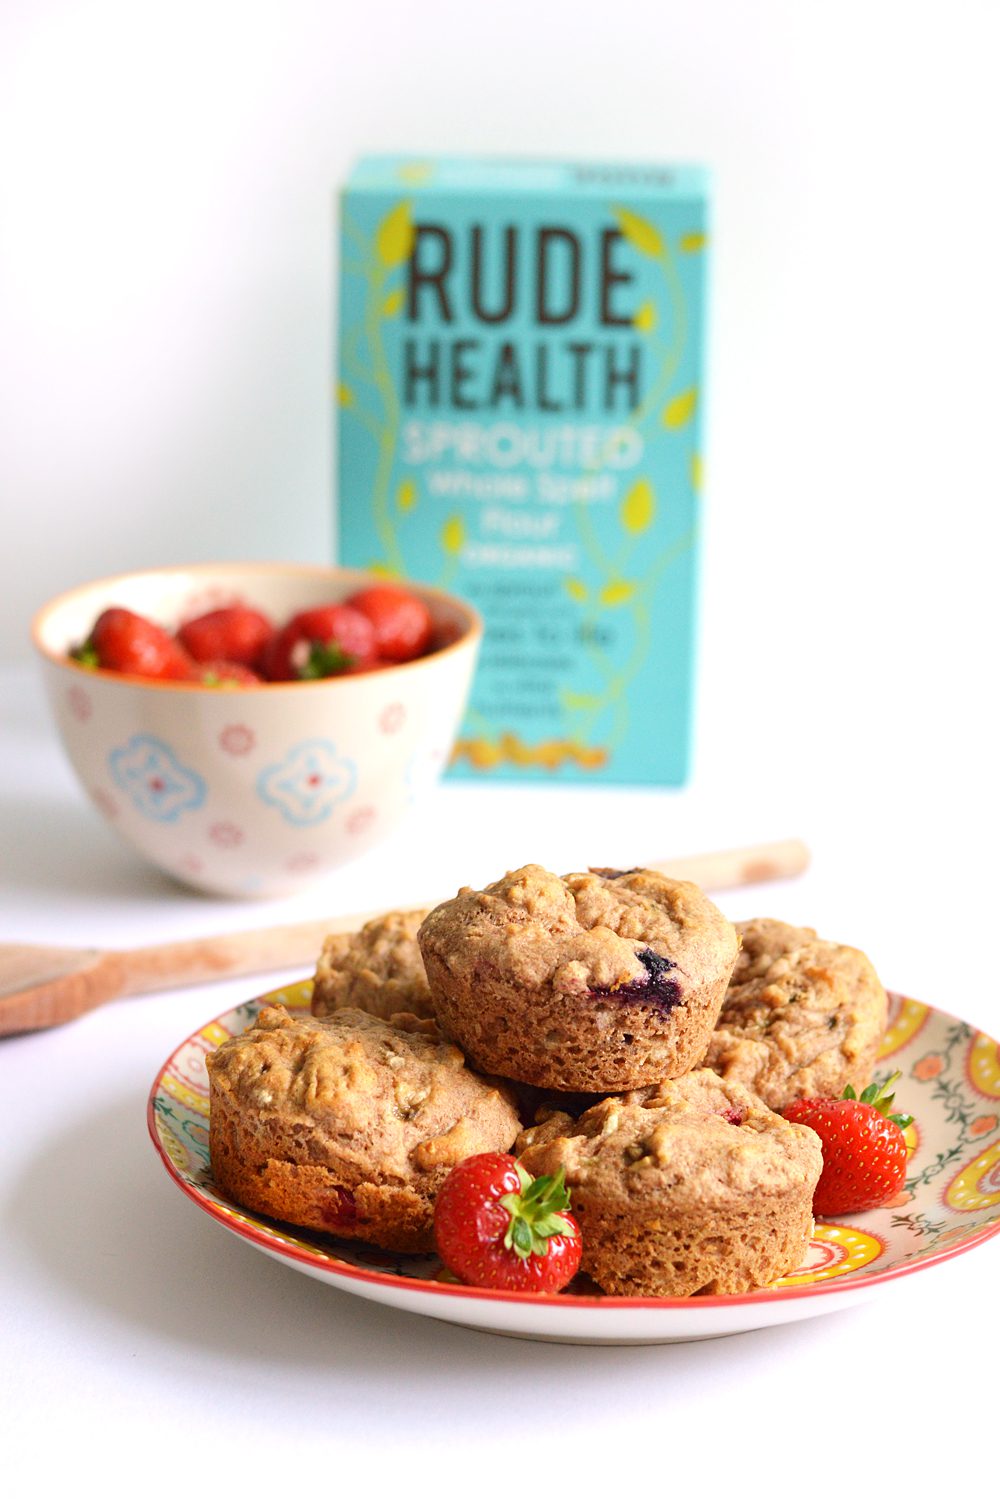 Rude health spouted grains muffins